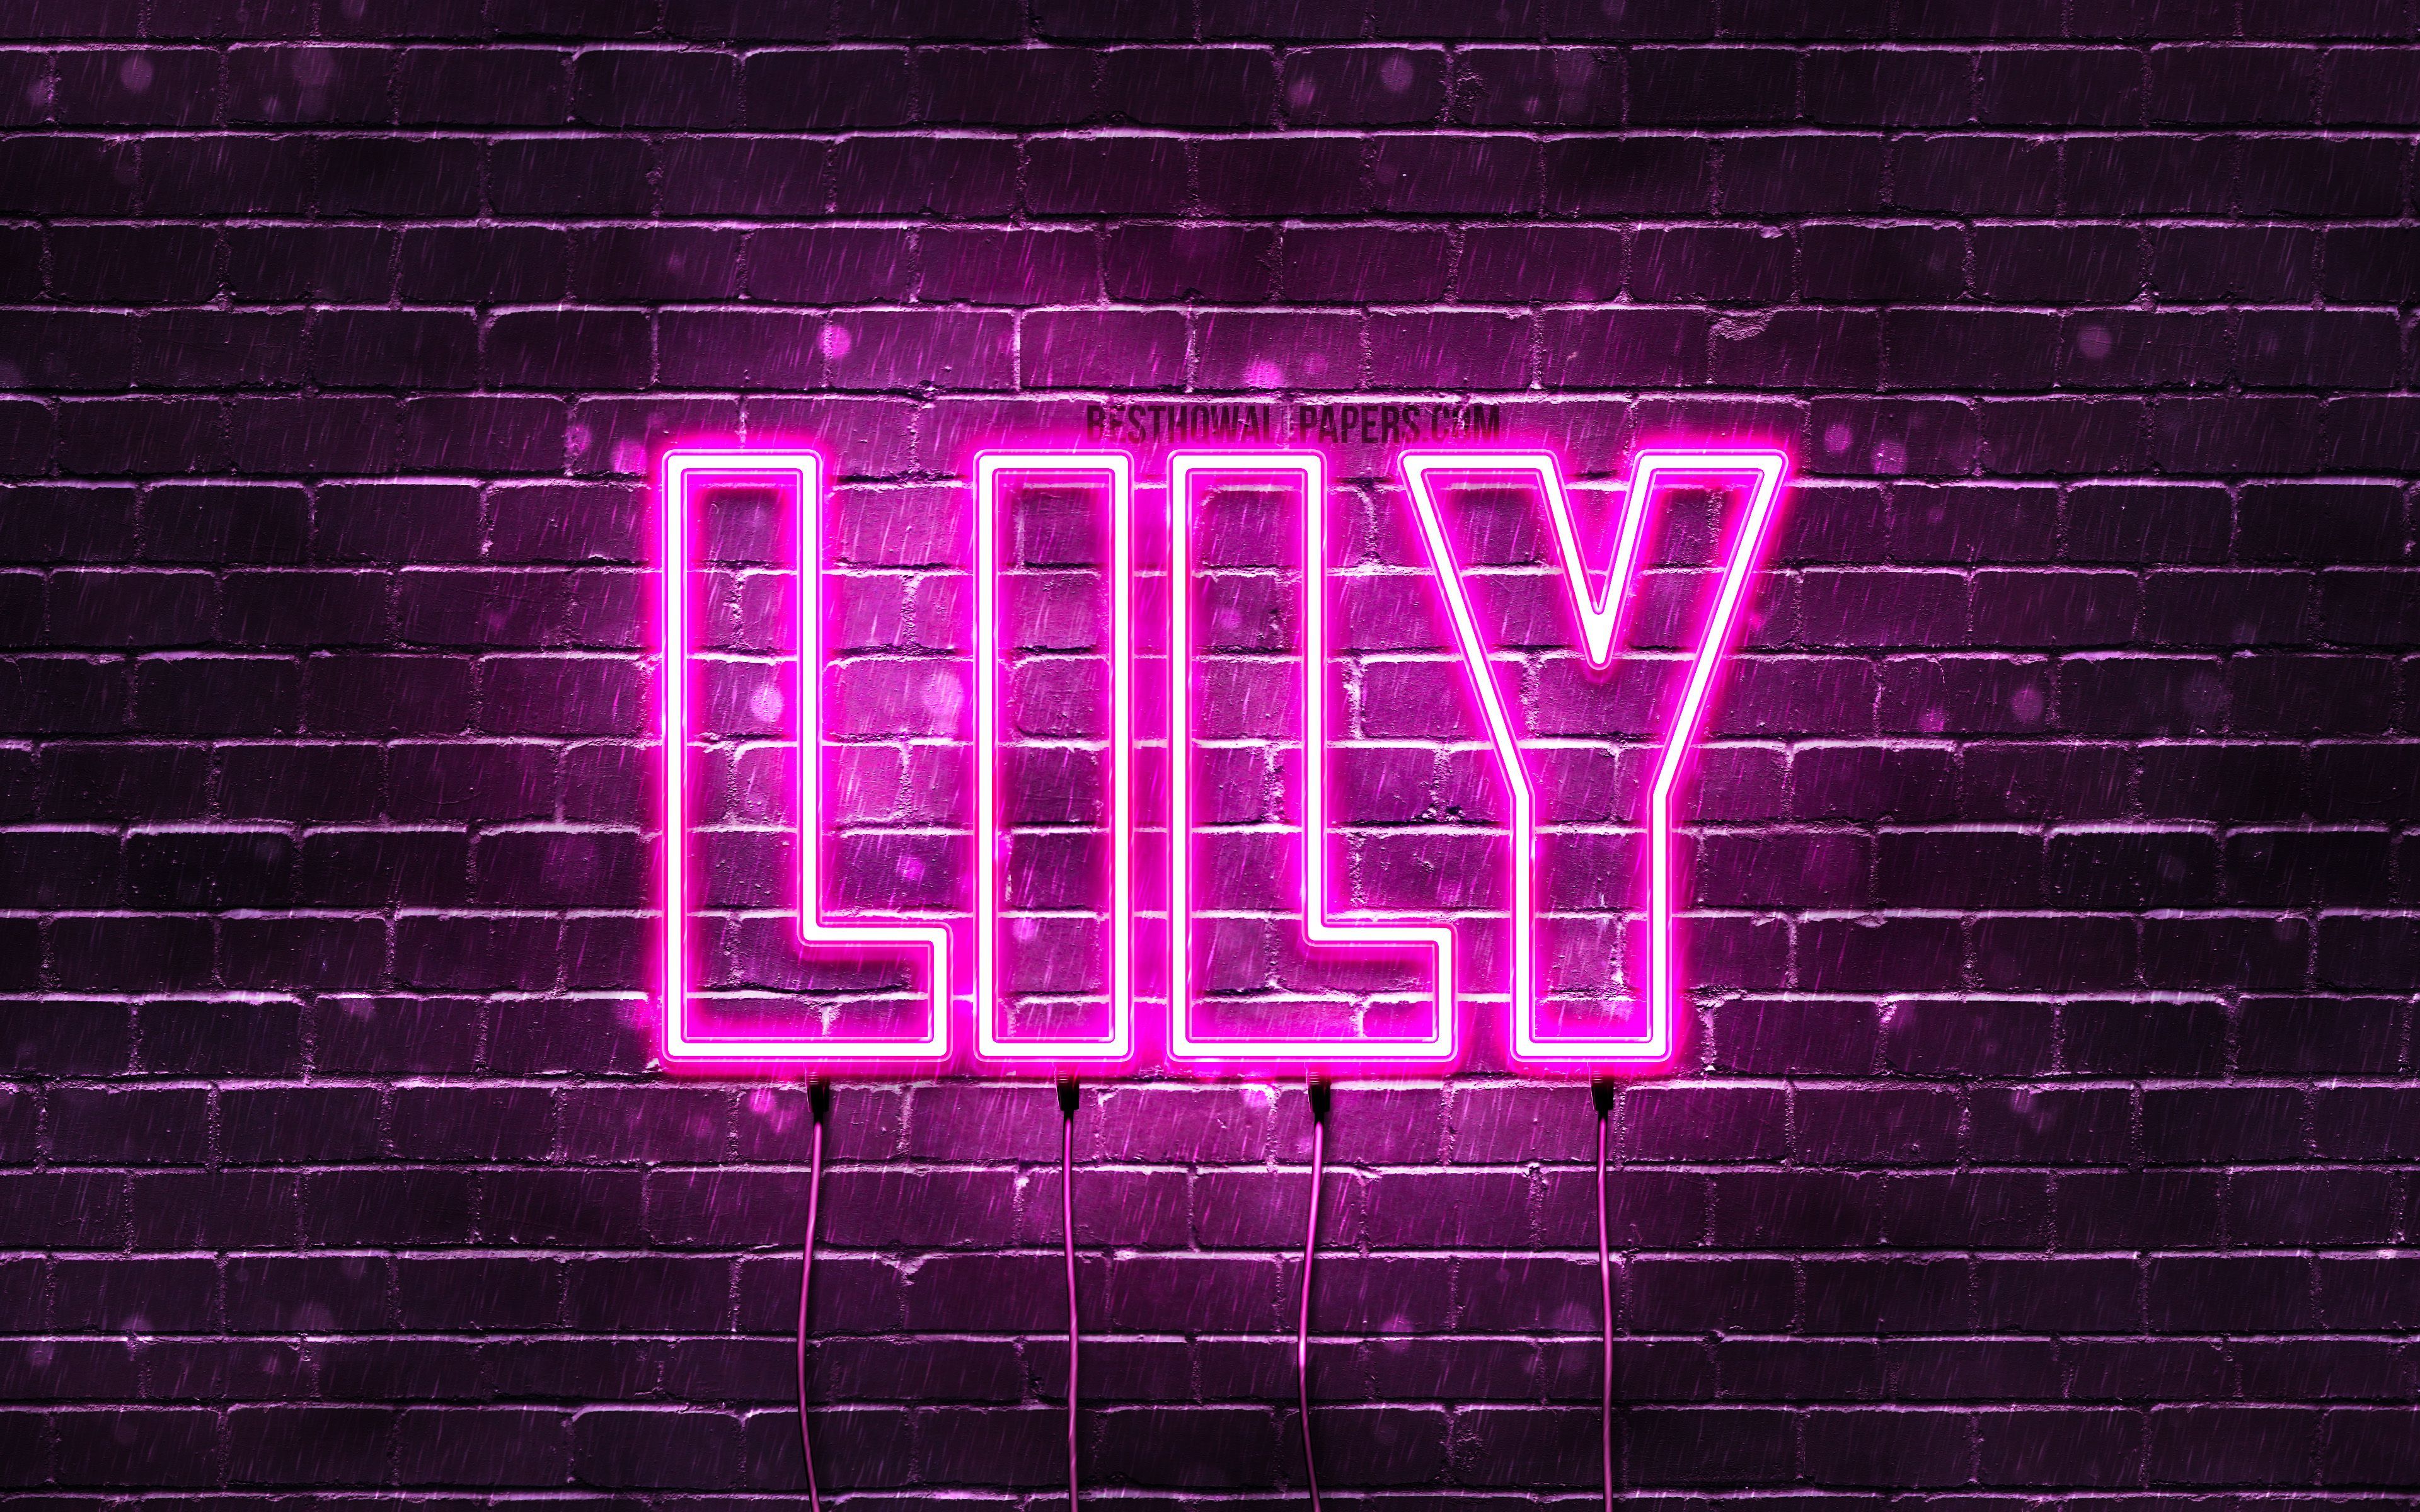 Lily, 4k, wallpaper with names, female names, Lily name, purple neon lights, horizontal text, picture with Lily name. Neon, Neon signs, Wallpaper